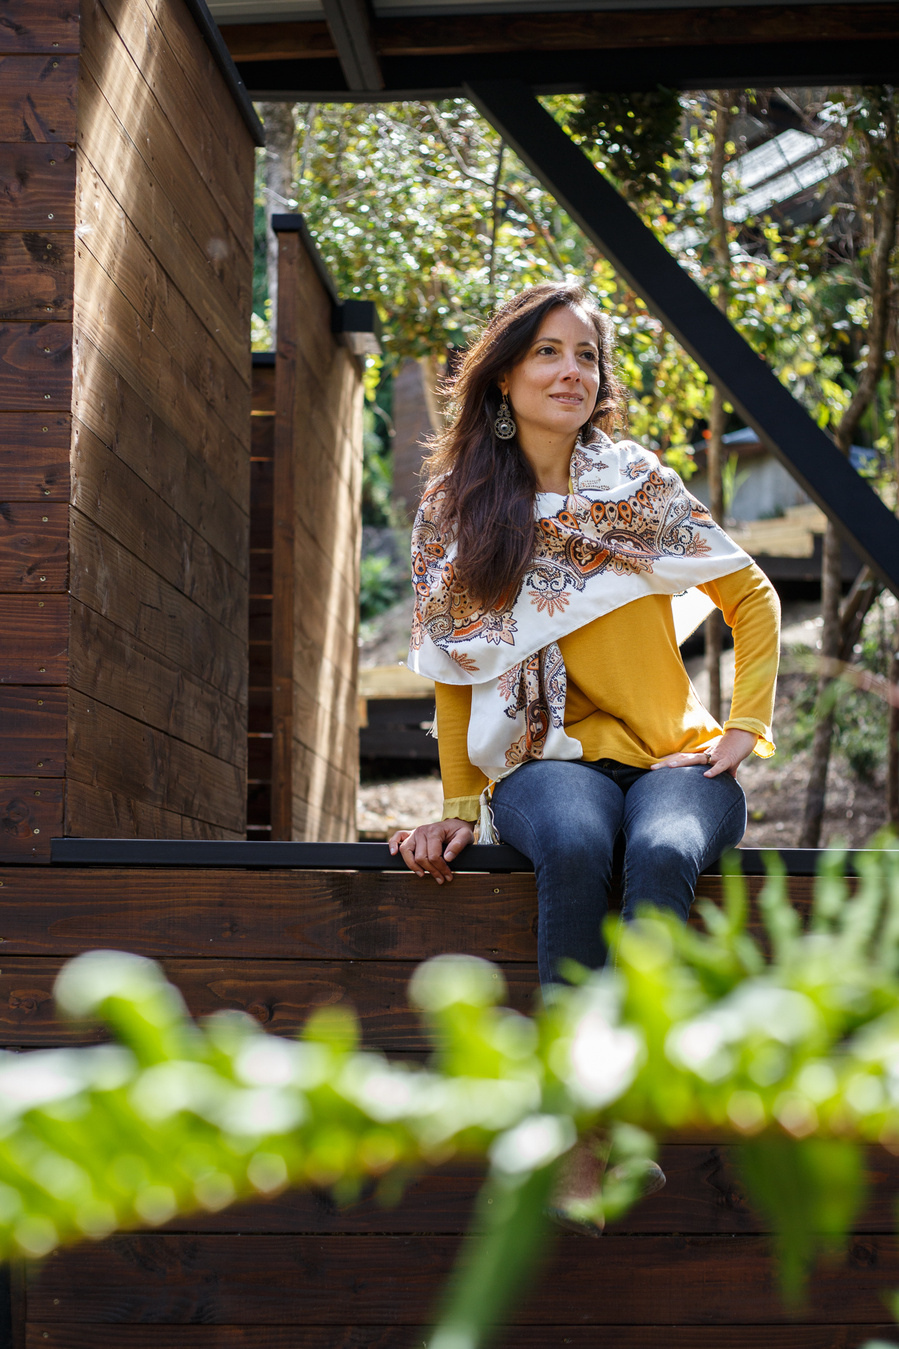 A woman with a yellow sweater sits on a wooden structures and there are blurry plants in the foreground. 